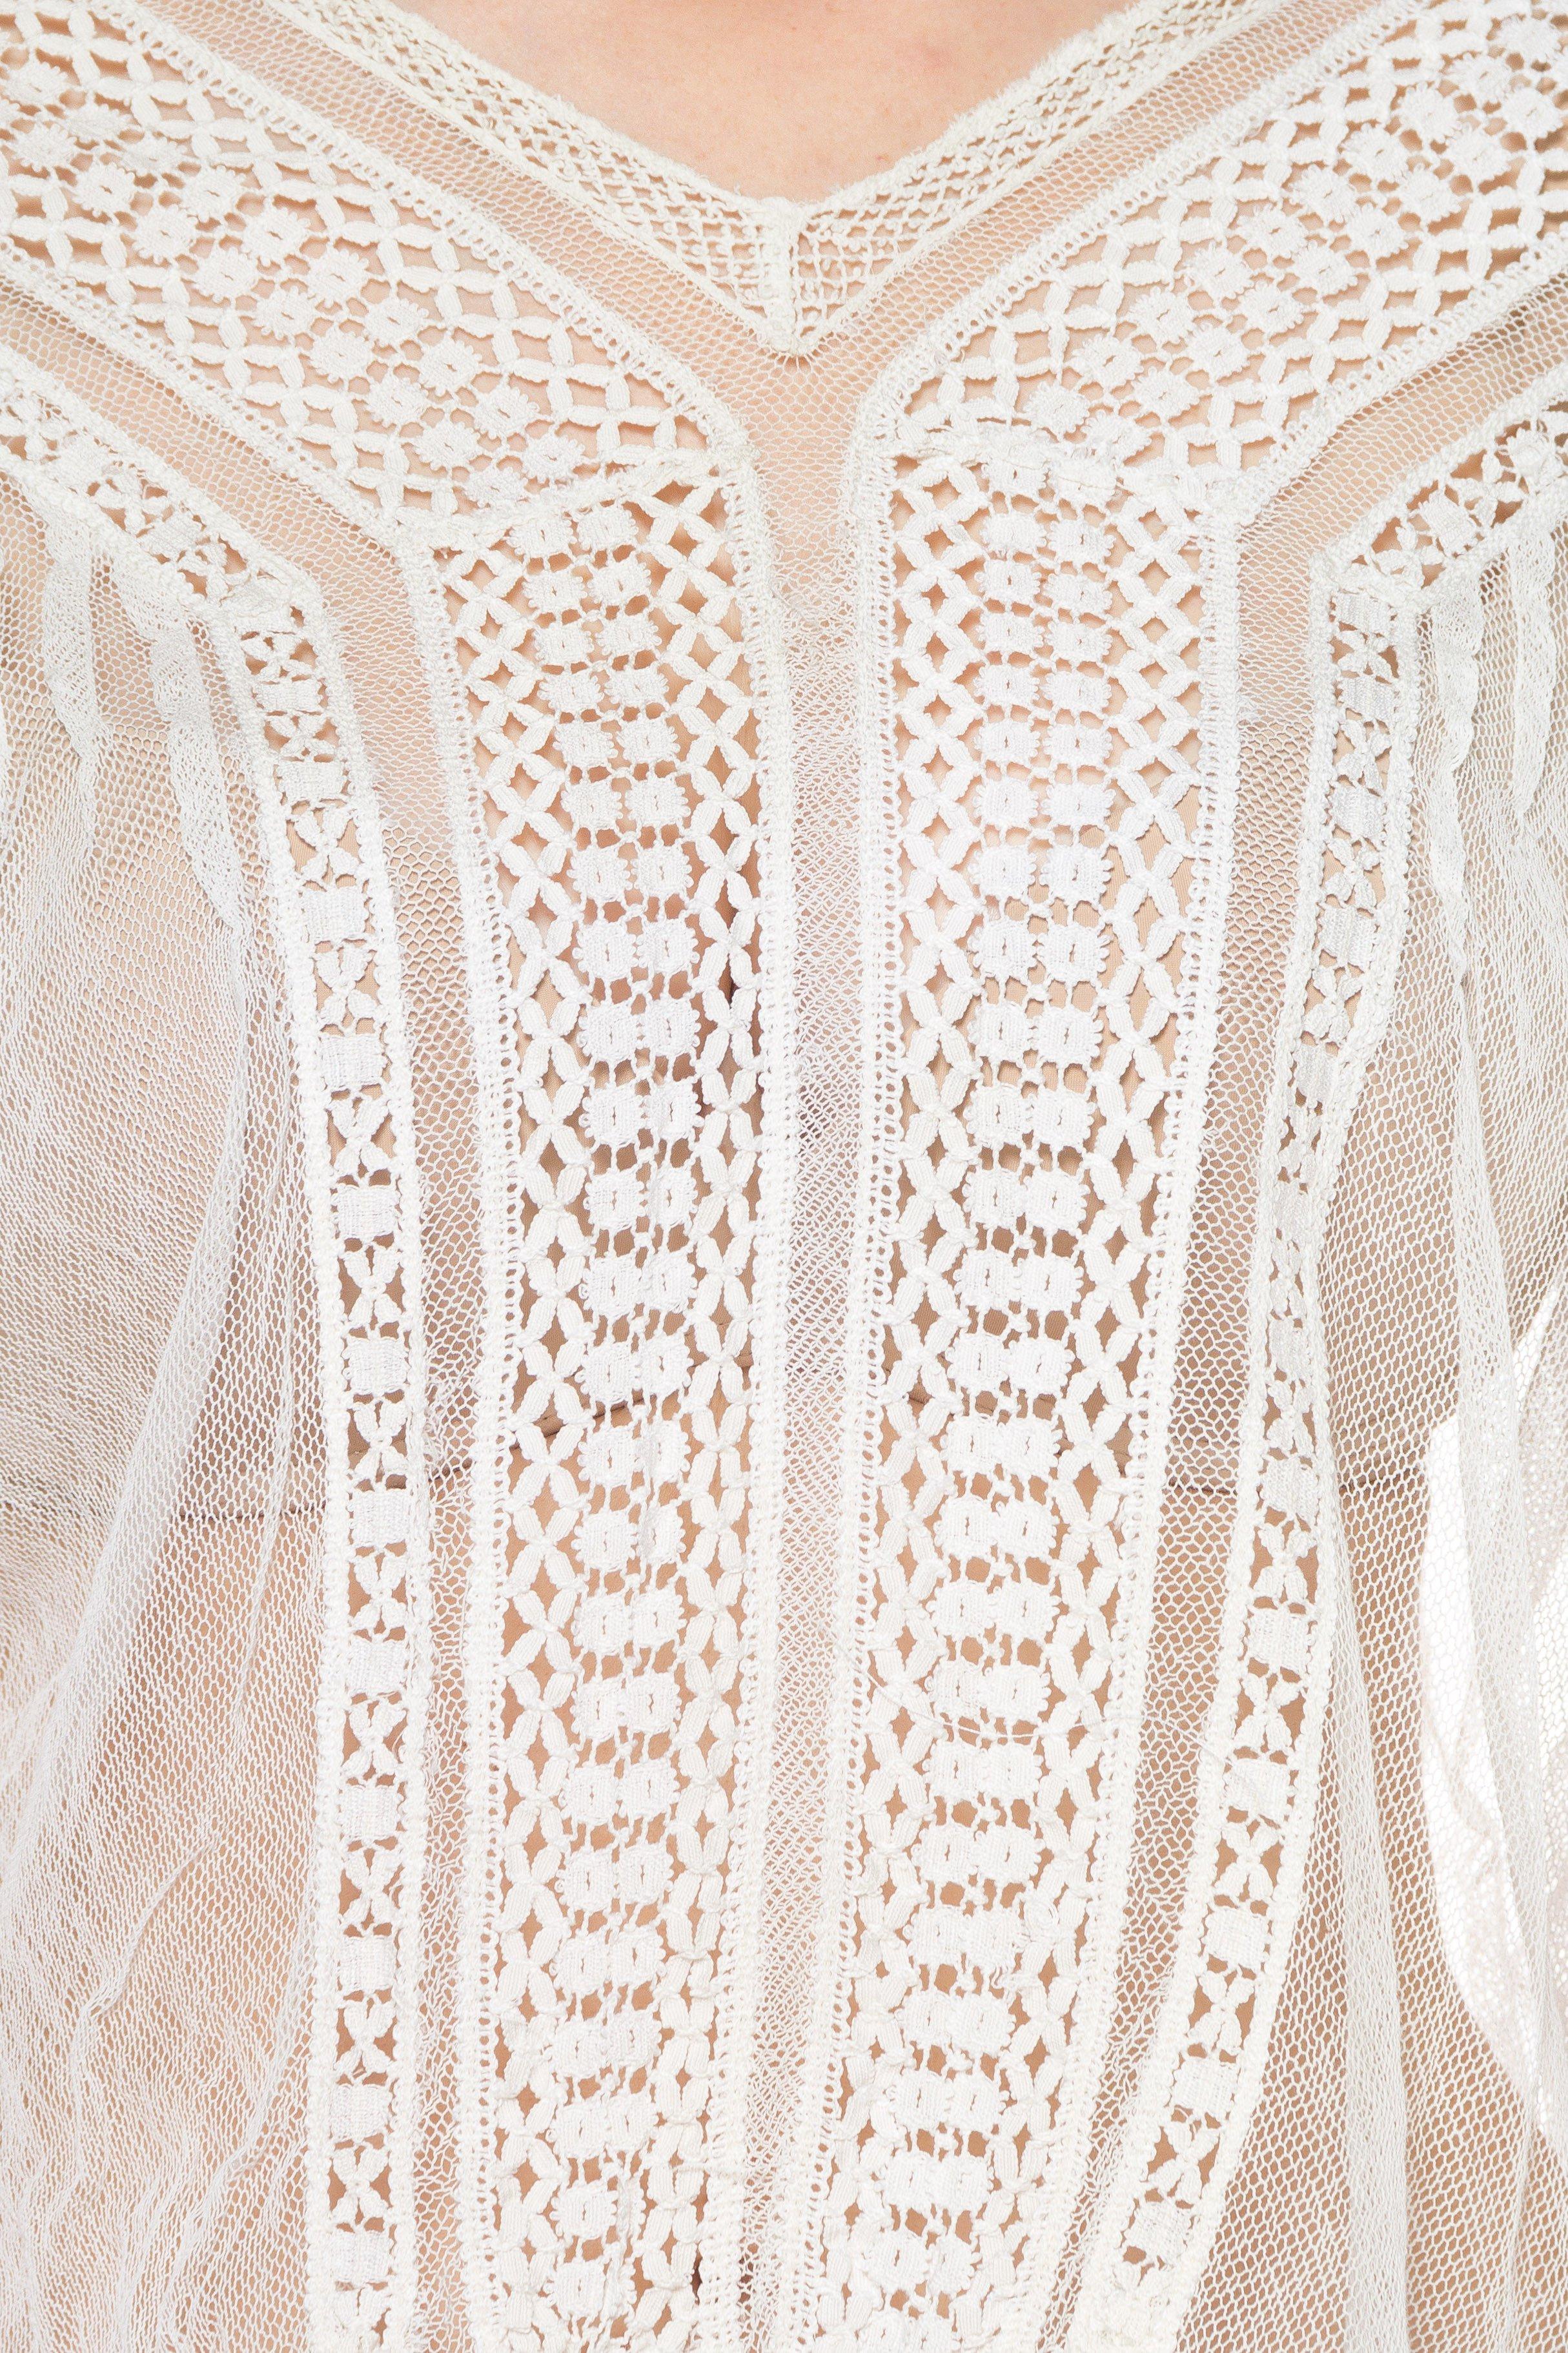 Women's 1900S White Sheer Cotton Net Blouse With Cluny Style Lace Insertion In The Bodi